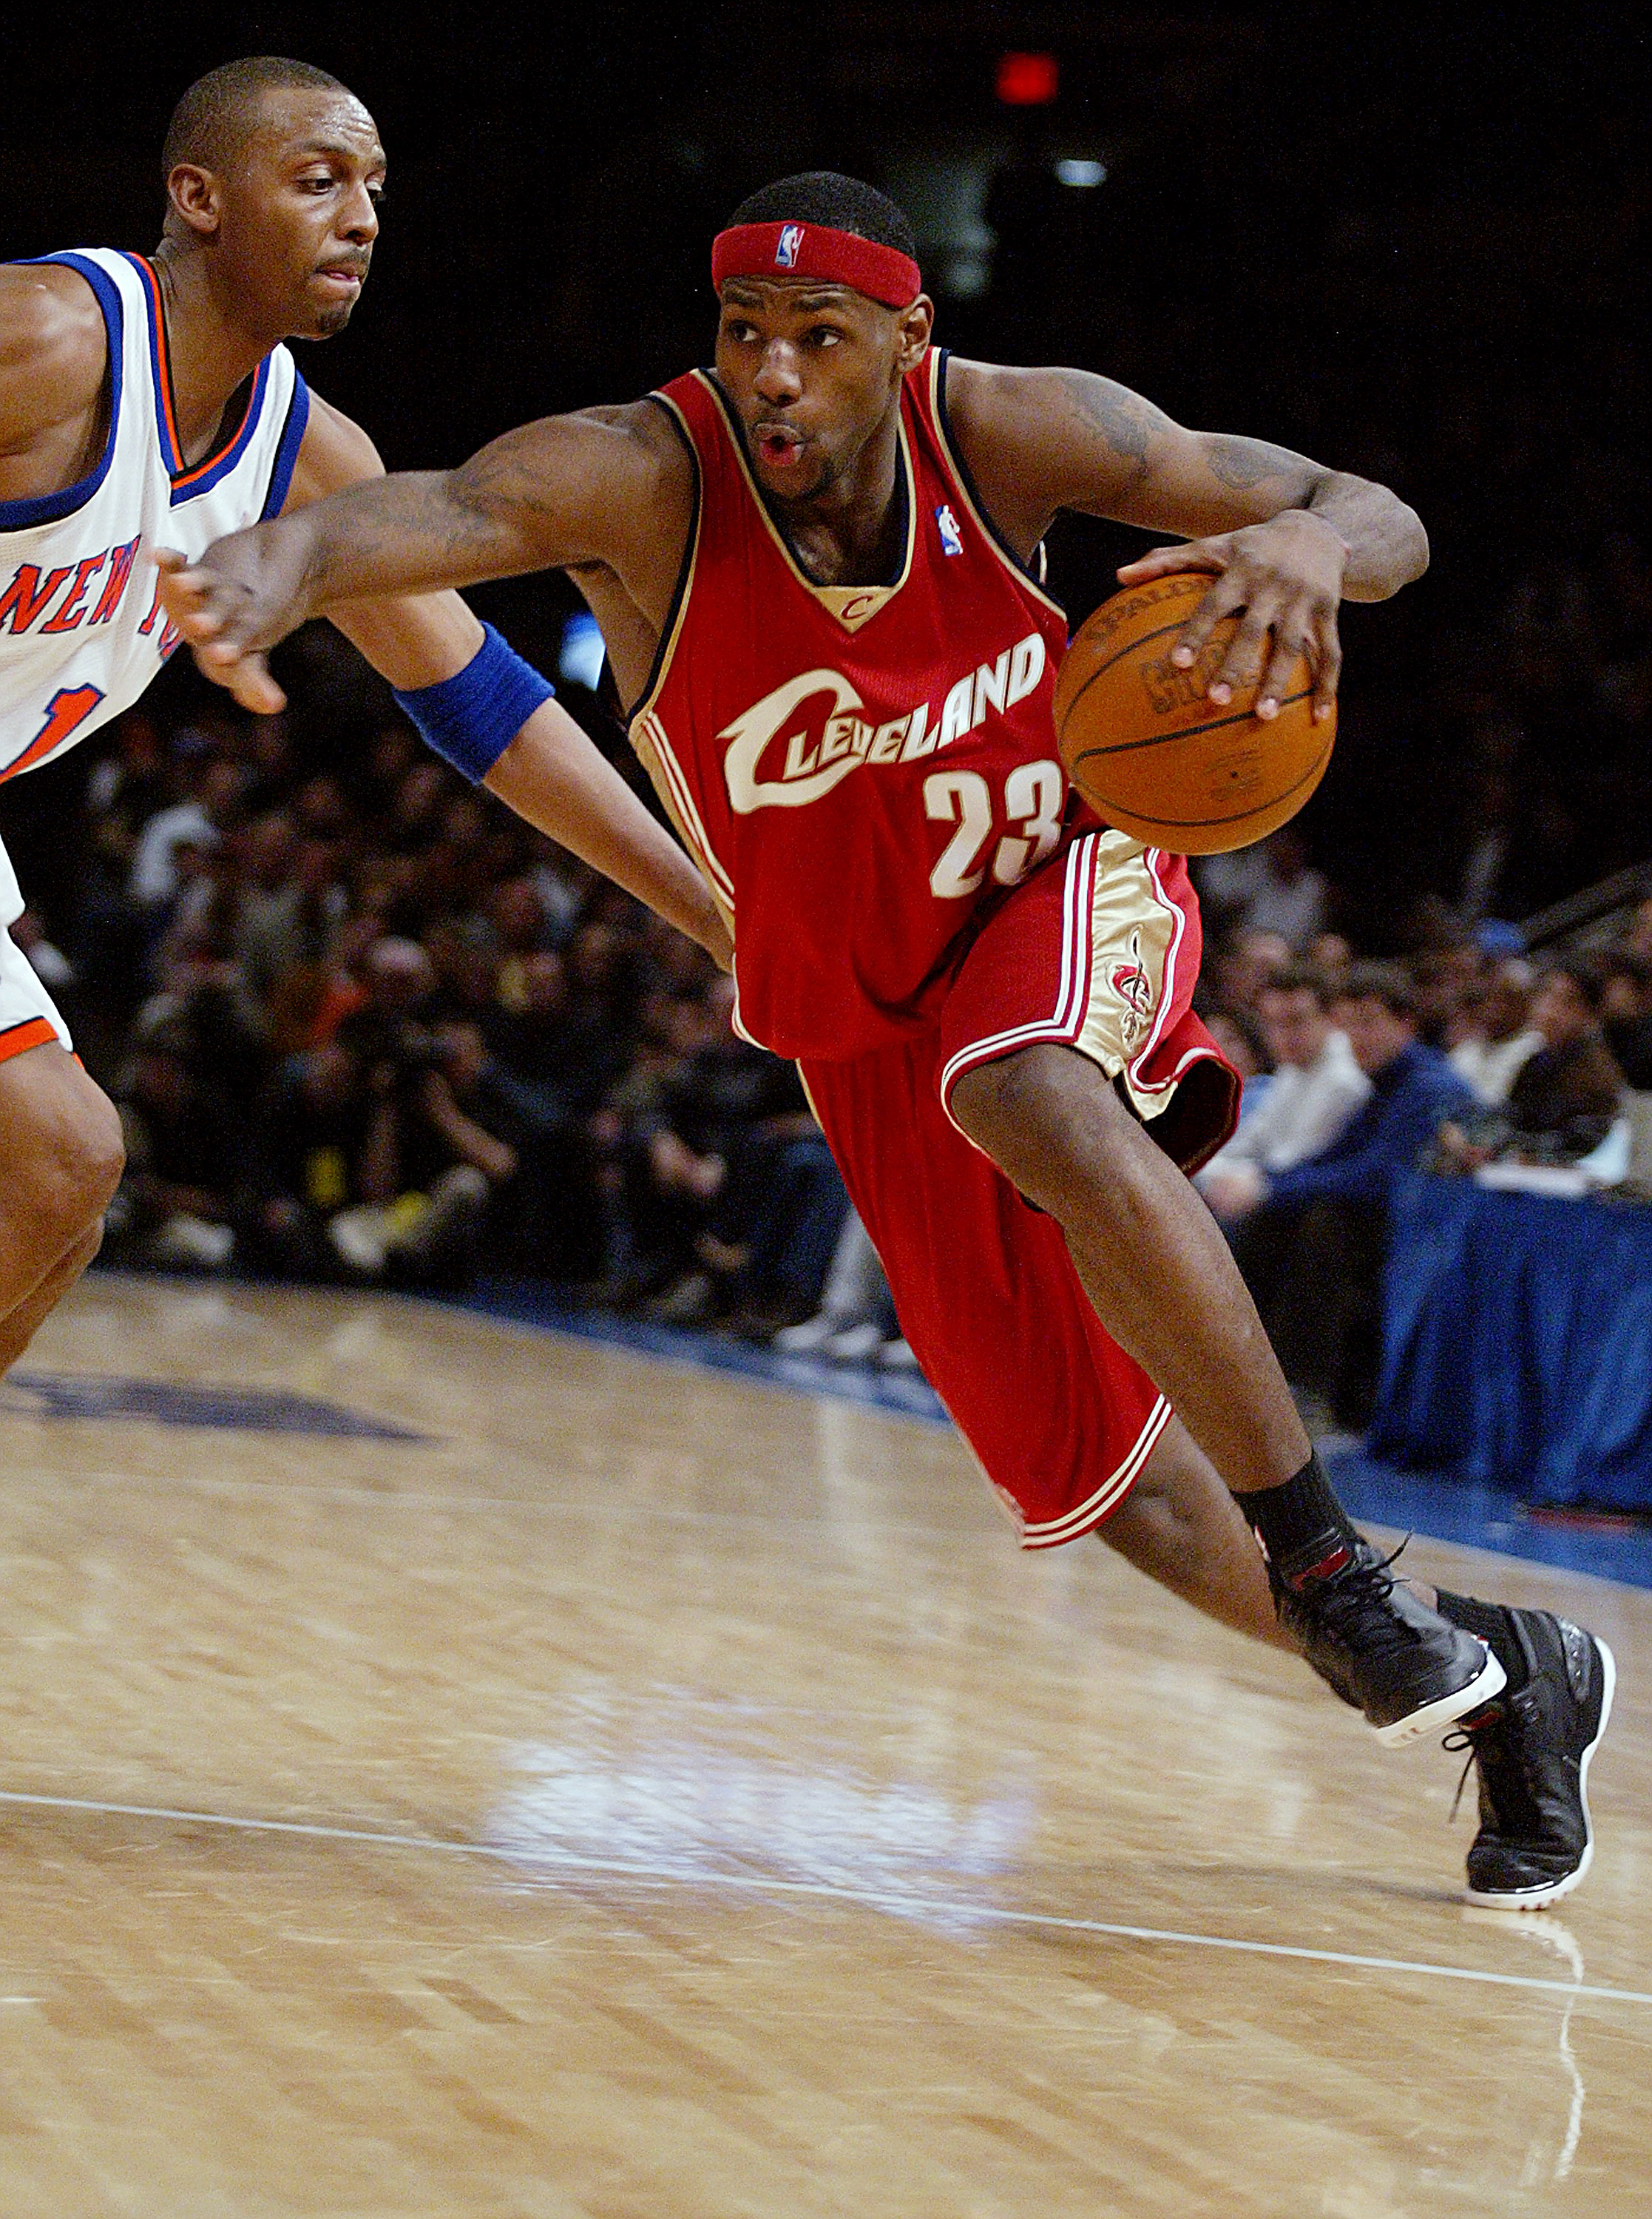 LeBron James early in his career playing for the Cleveland Cavaliers circa 2002 | Source: Getty Images